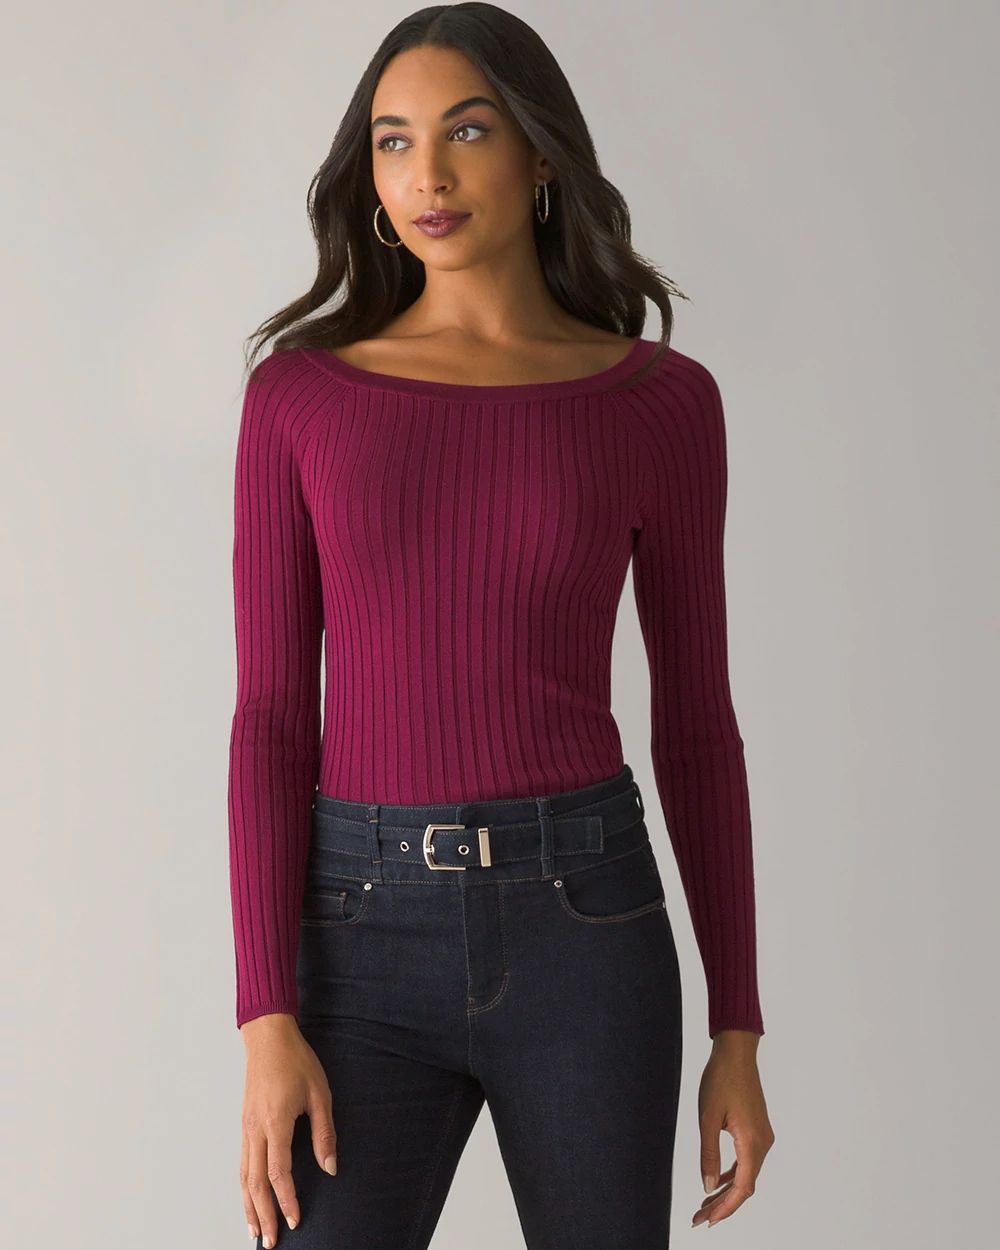 Ribbed Bateau Neck Pullover click to view larger image.